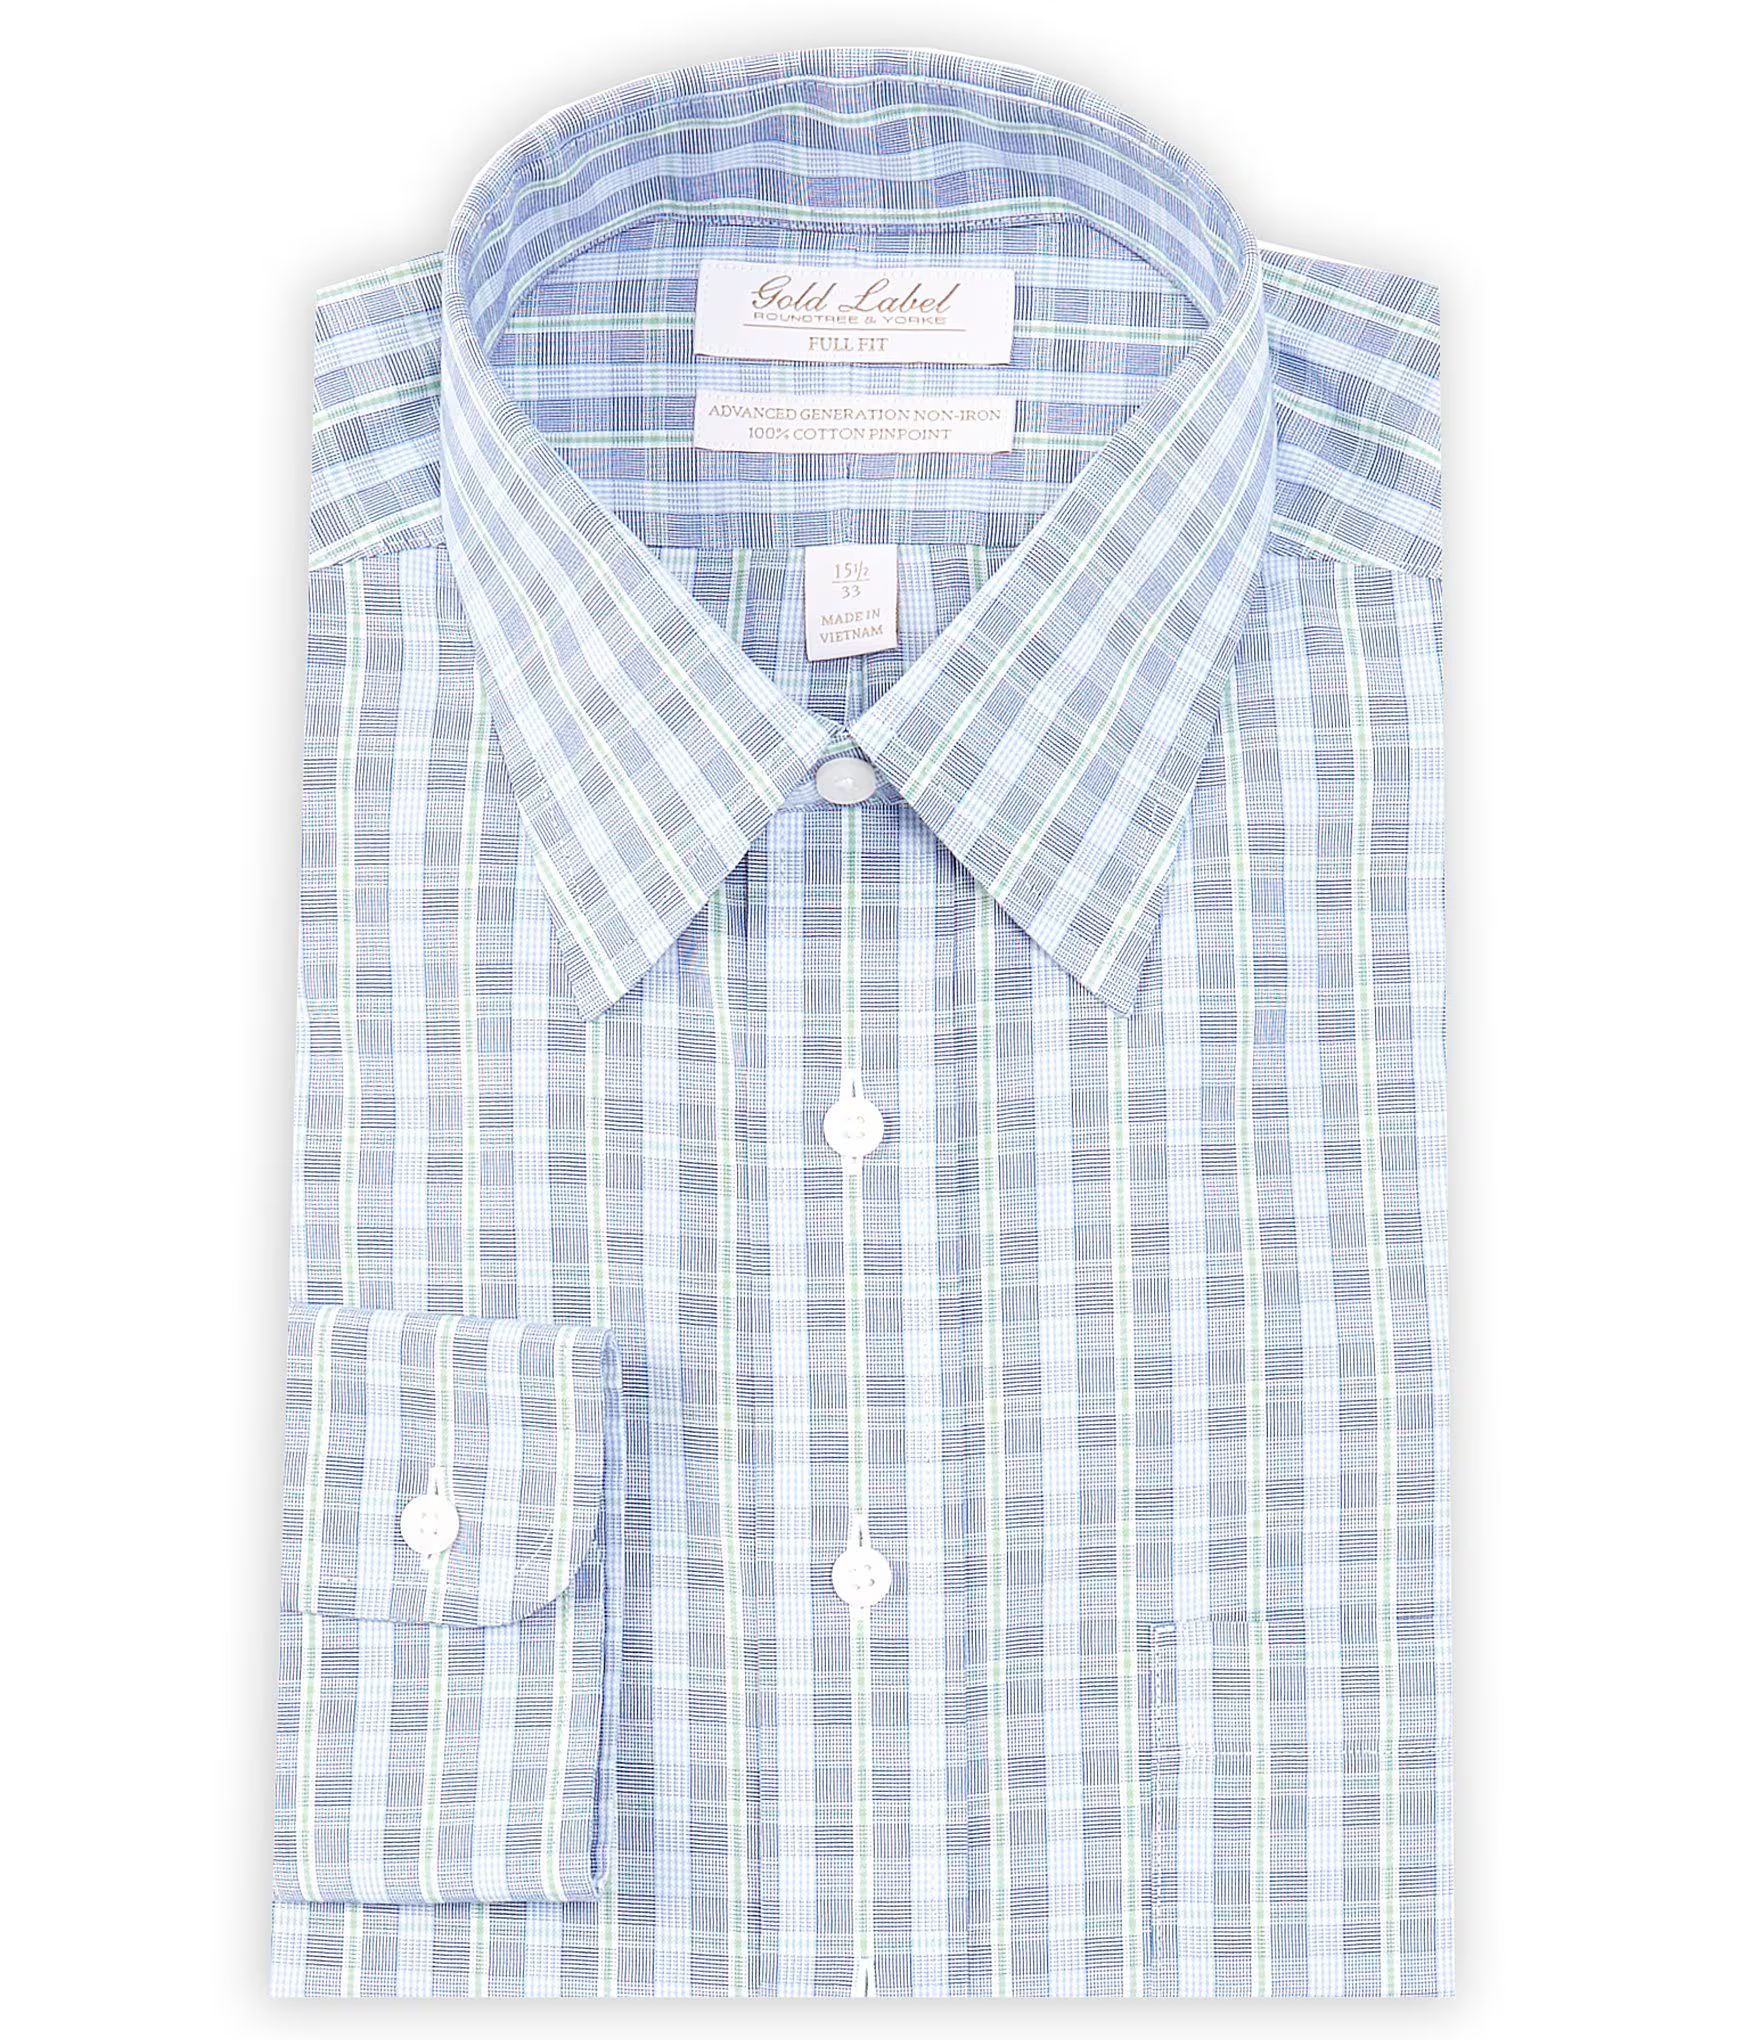 Gold Label Roundtree & Yorke Full Fit Non-Iron Point Collar Checked Dress Shirt | Dillard's